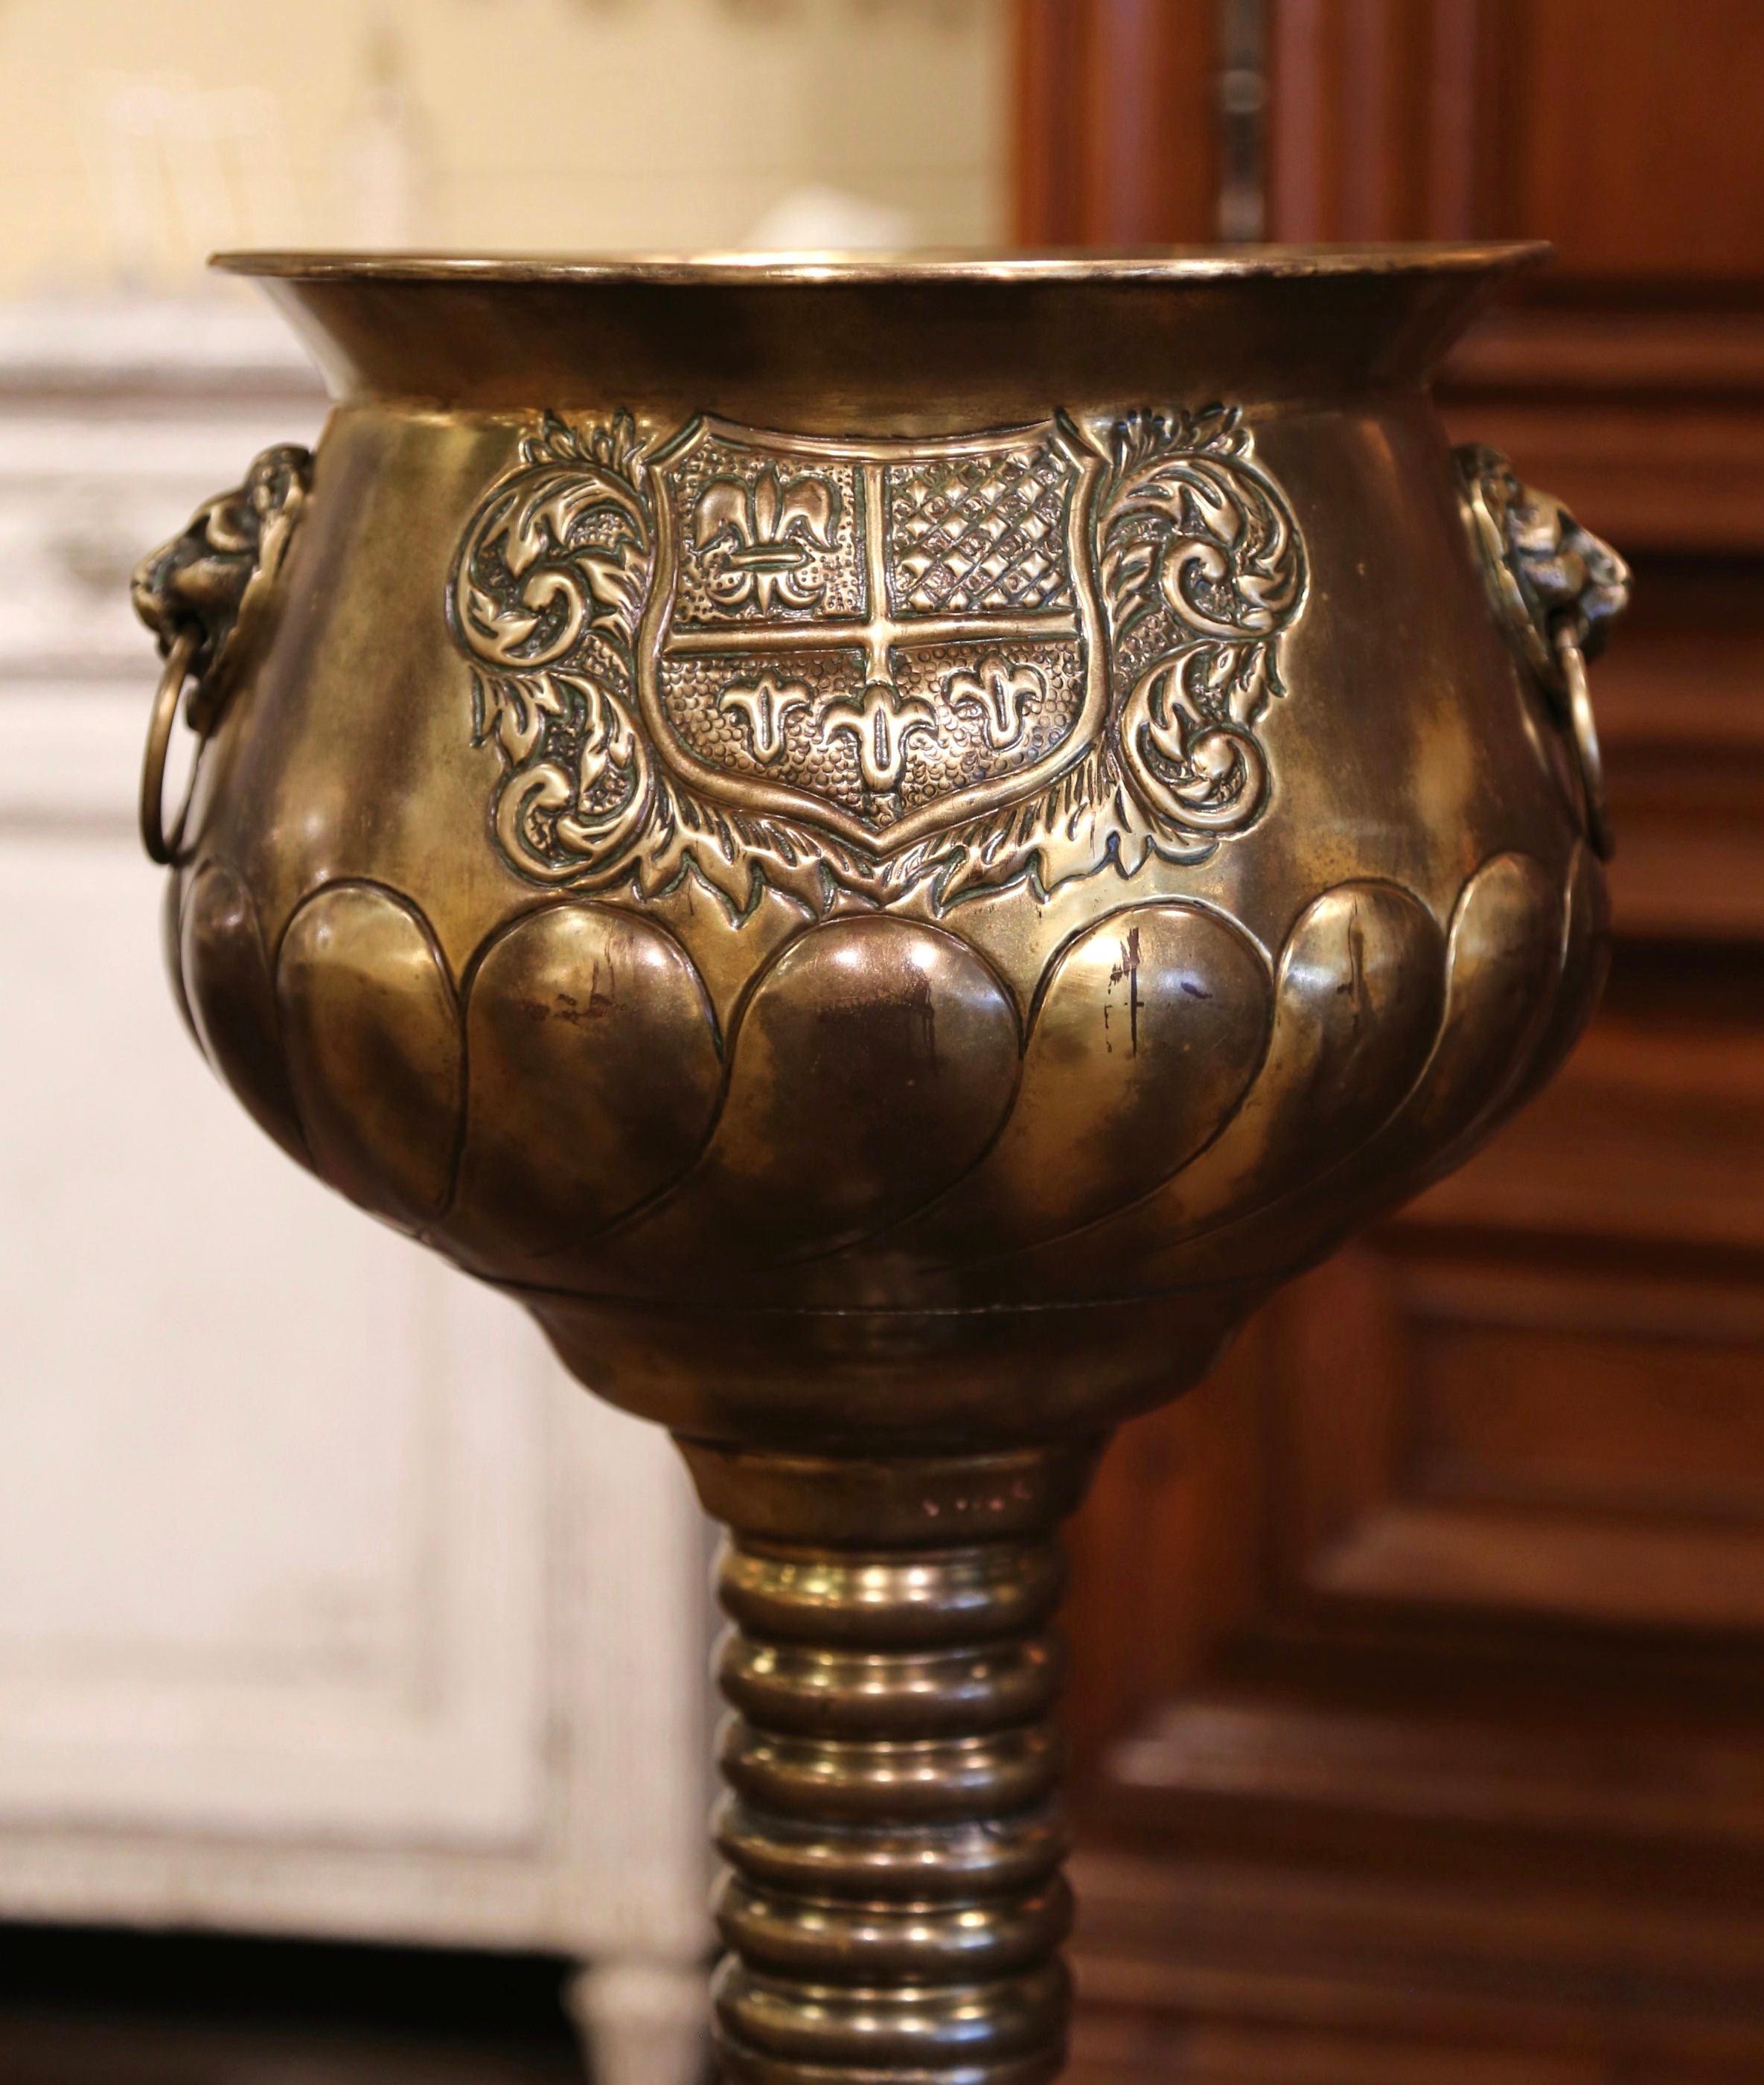 This large antique brass planter was crafted in France, circa 1880. Round in shape, the decorative cache pot stands on an integral circular base decorated with repousse acanthus leaves, over a long stem embellished with turned ring motifs. The